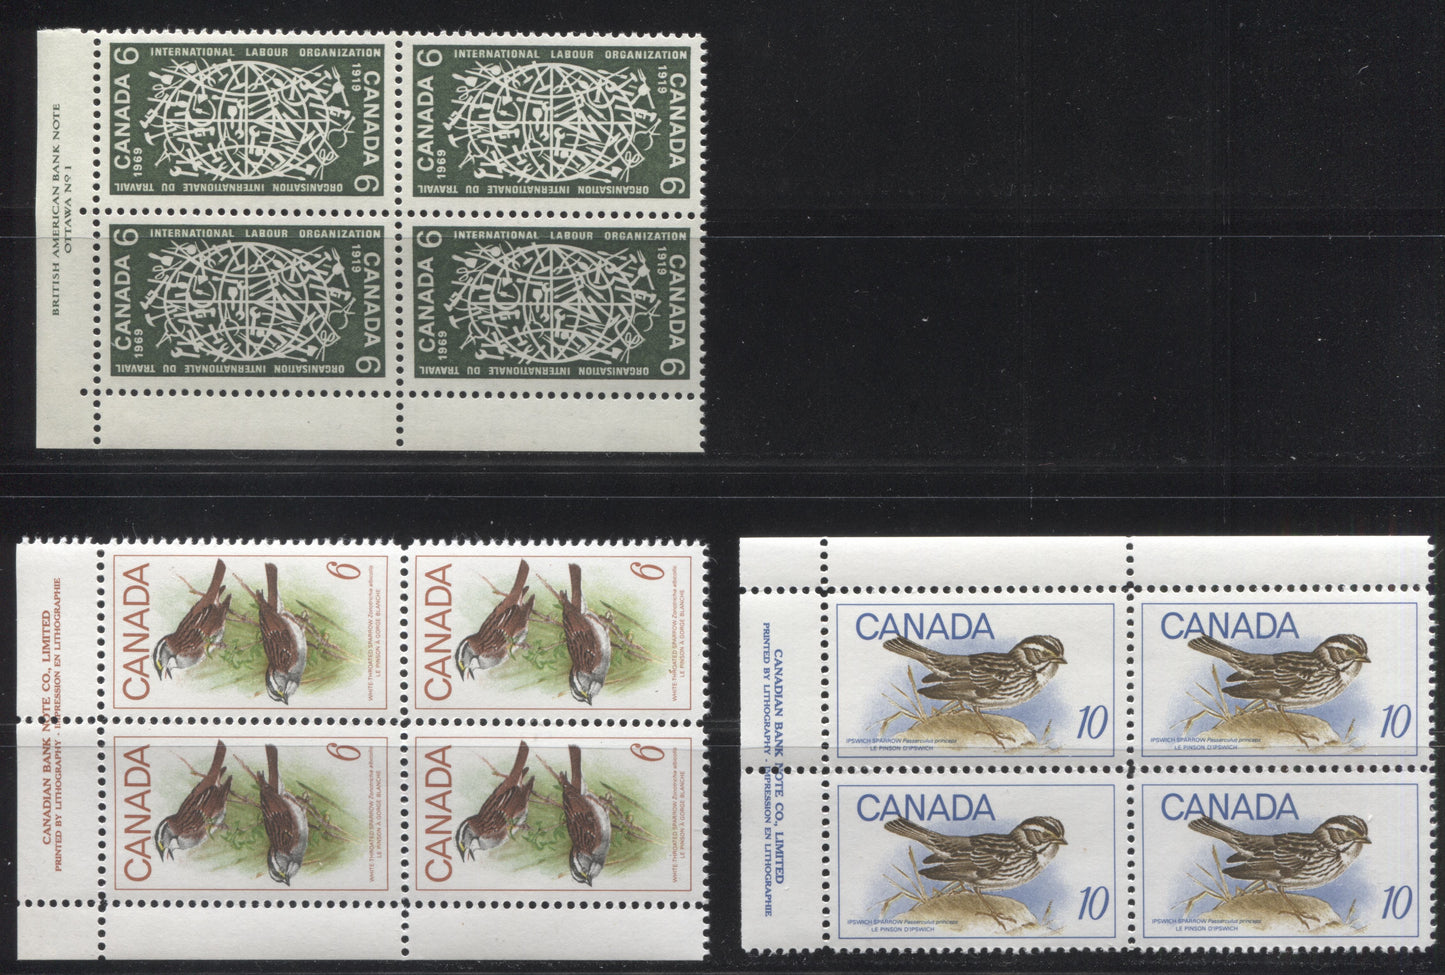 Lot 95 Canada #493, 496-497 6c & 10c Dark Olive Green - Ultramarine & Multicolored Globe & Tools - Ipswich Sparrow, 1969 Commemoratives, 3 VFNH UL Plate 1 Blocks Of 4 On Dull Fluorescent and HB Papers